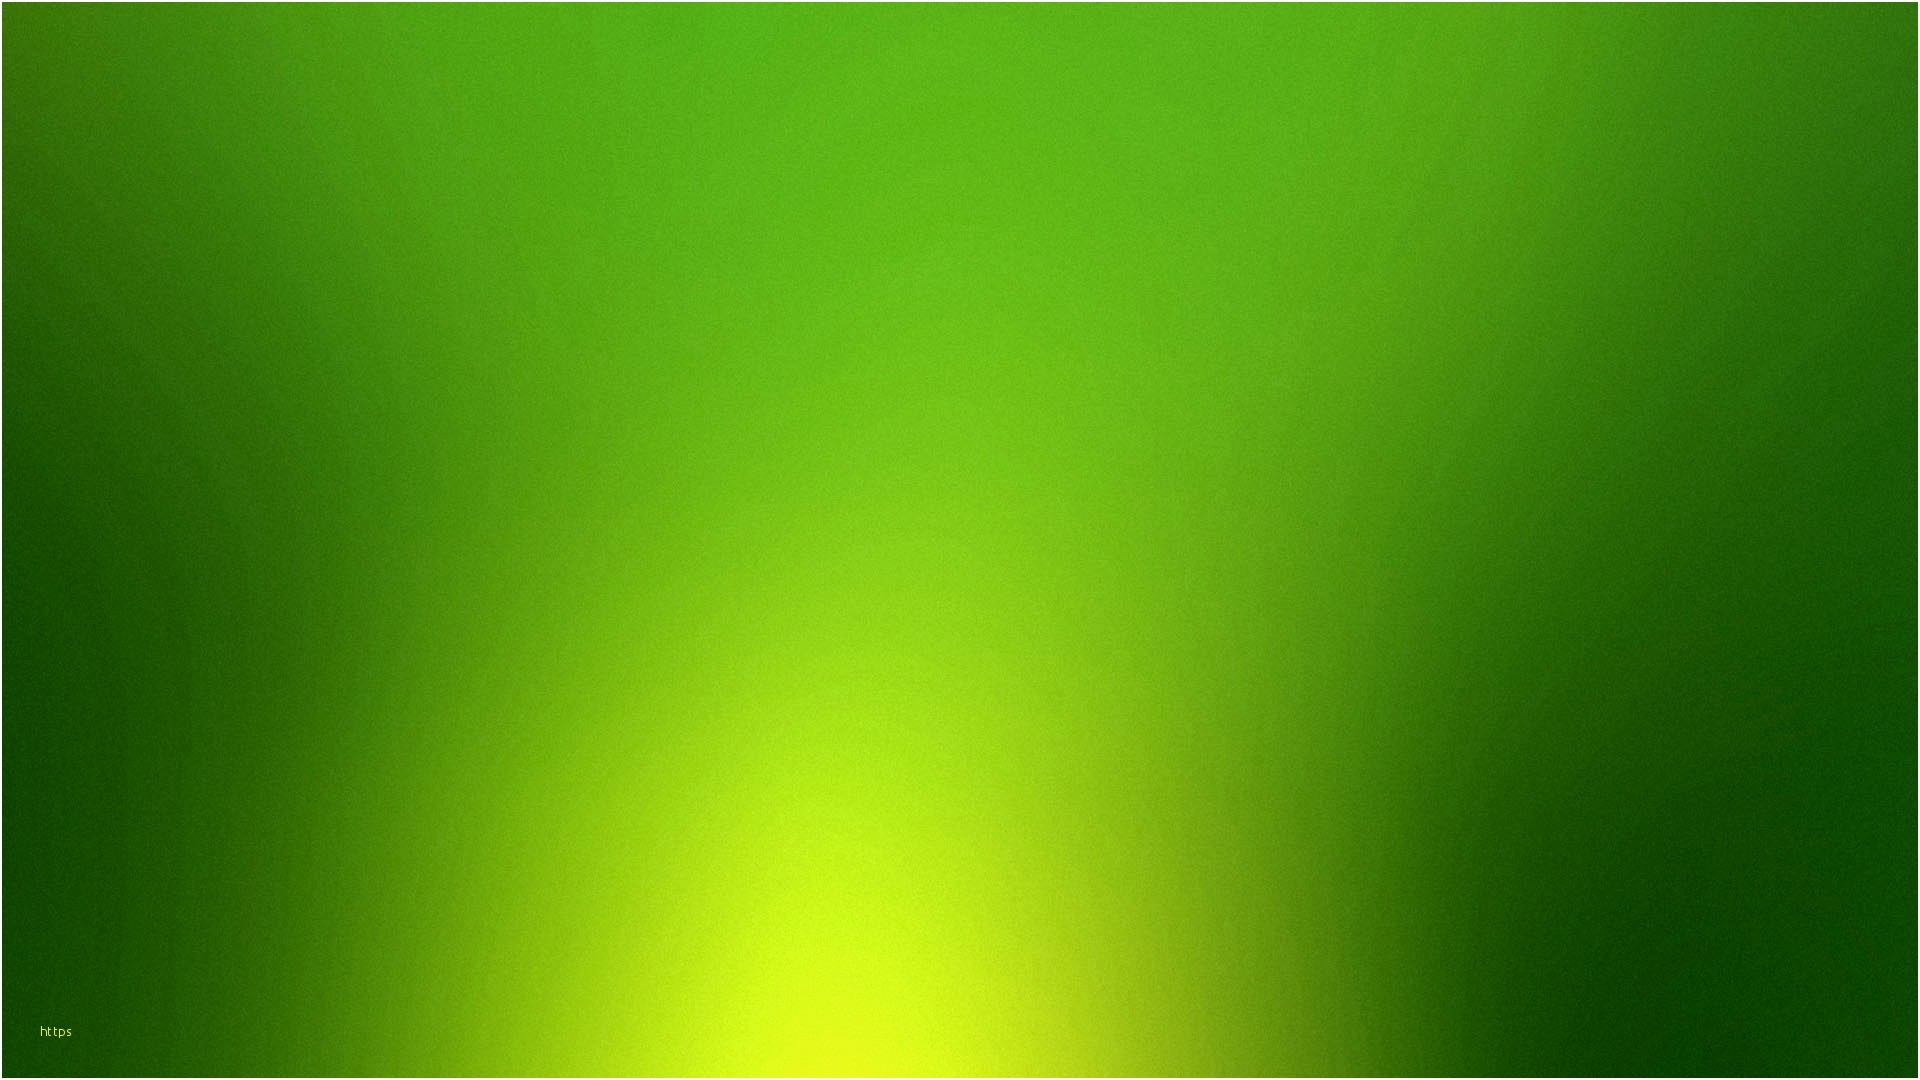 1920x1080 Lime Green Wallpaper Awesome Lime Green Wallpaper Lime Green Wallpaper  Awesome Hd Lime Green Backgrounds